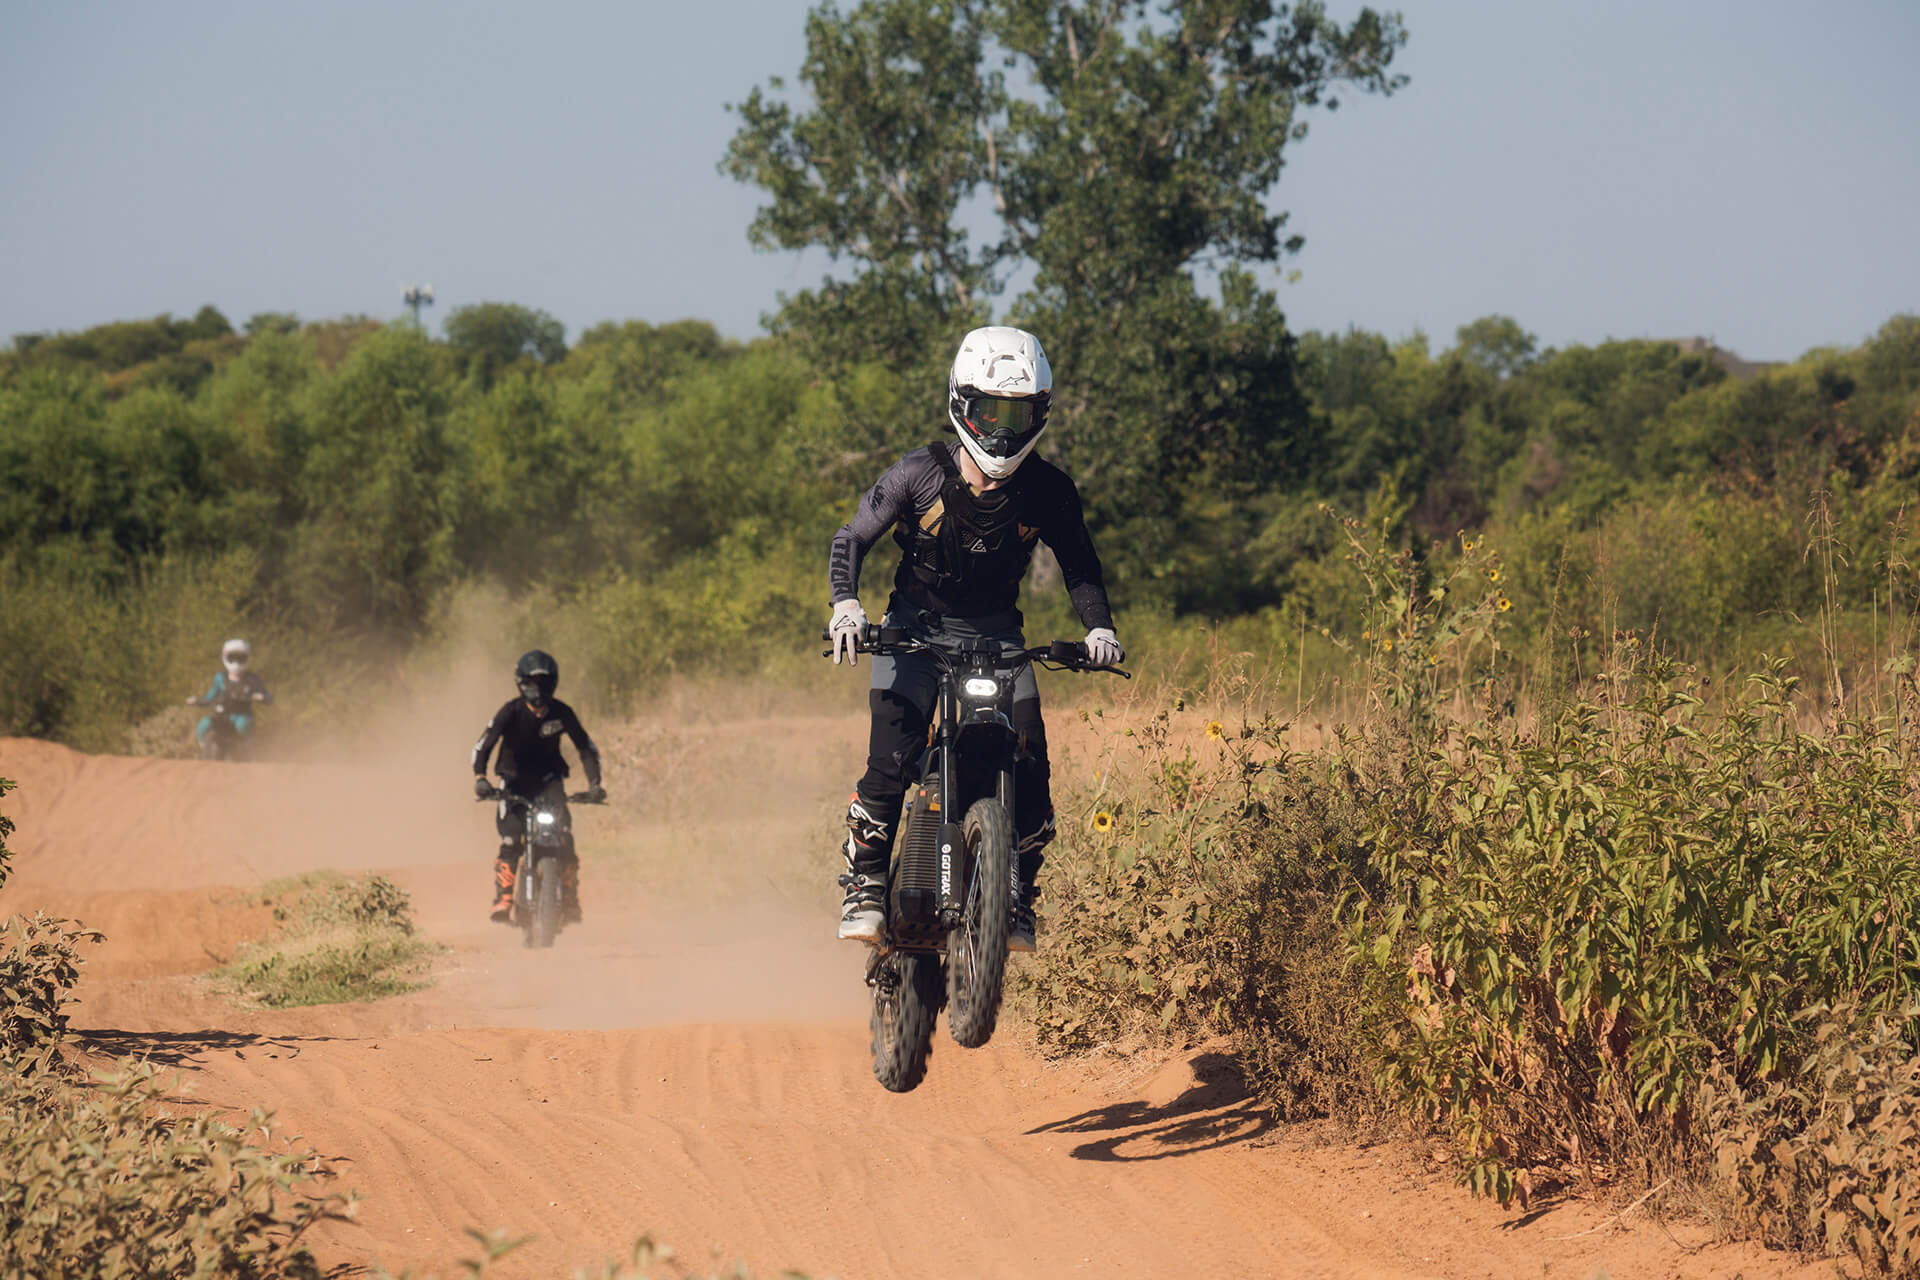 People riding on GOTRAX Everest Electric Dirt Bikes on a Dirt Track